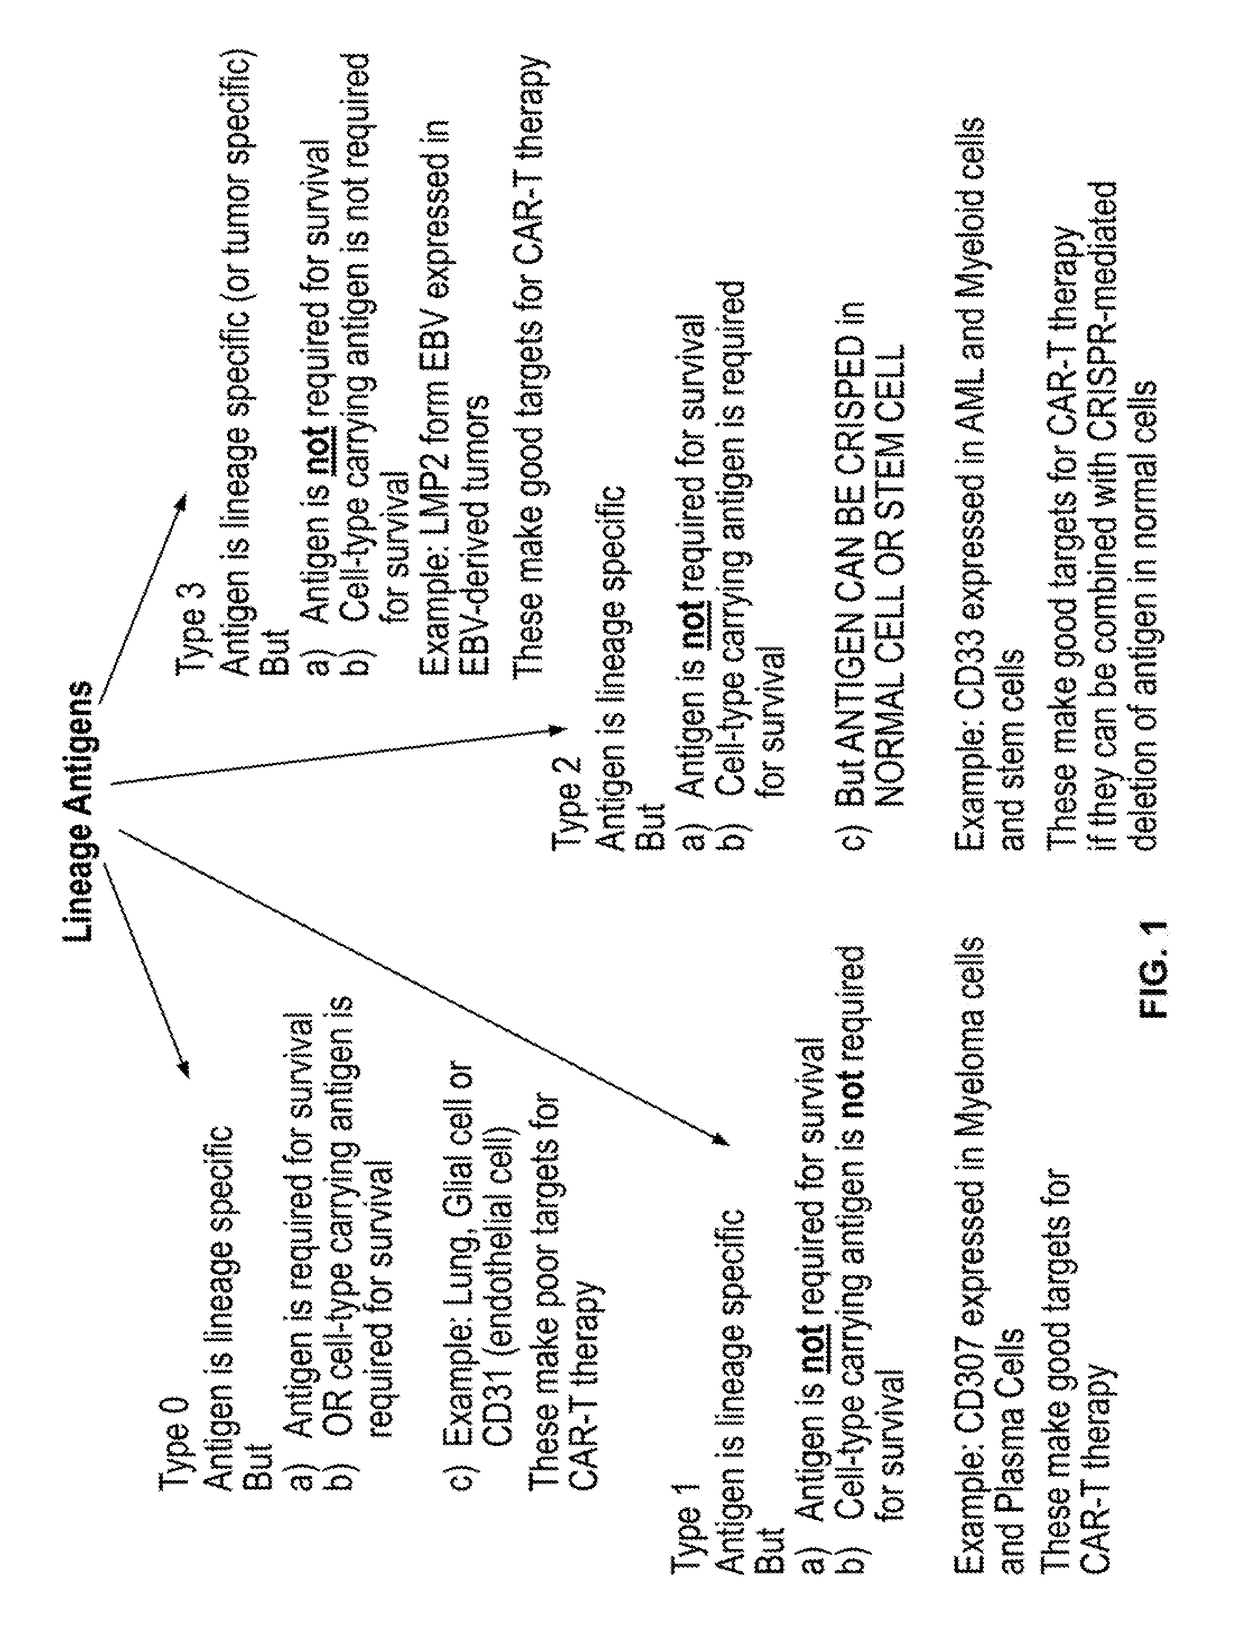 Compositions and methods for inhibition of lineage specific antigens